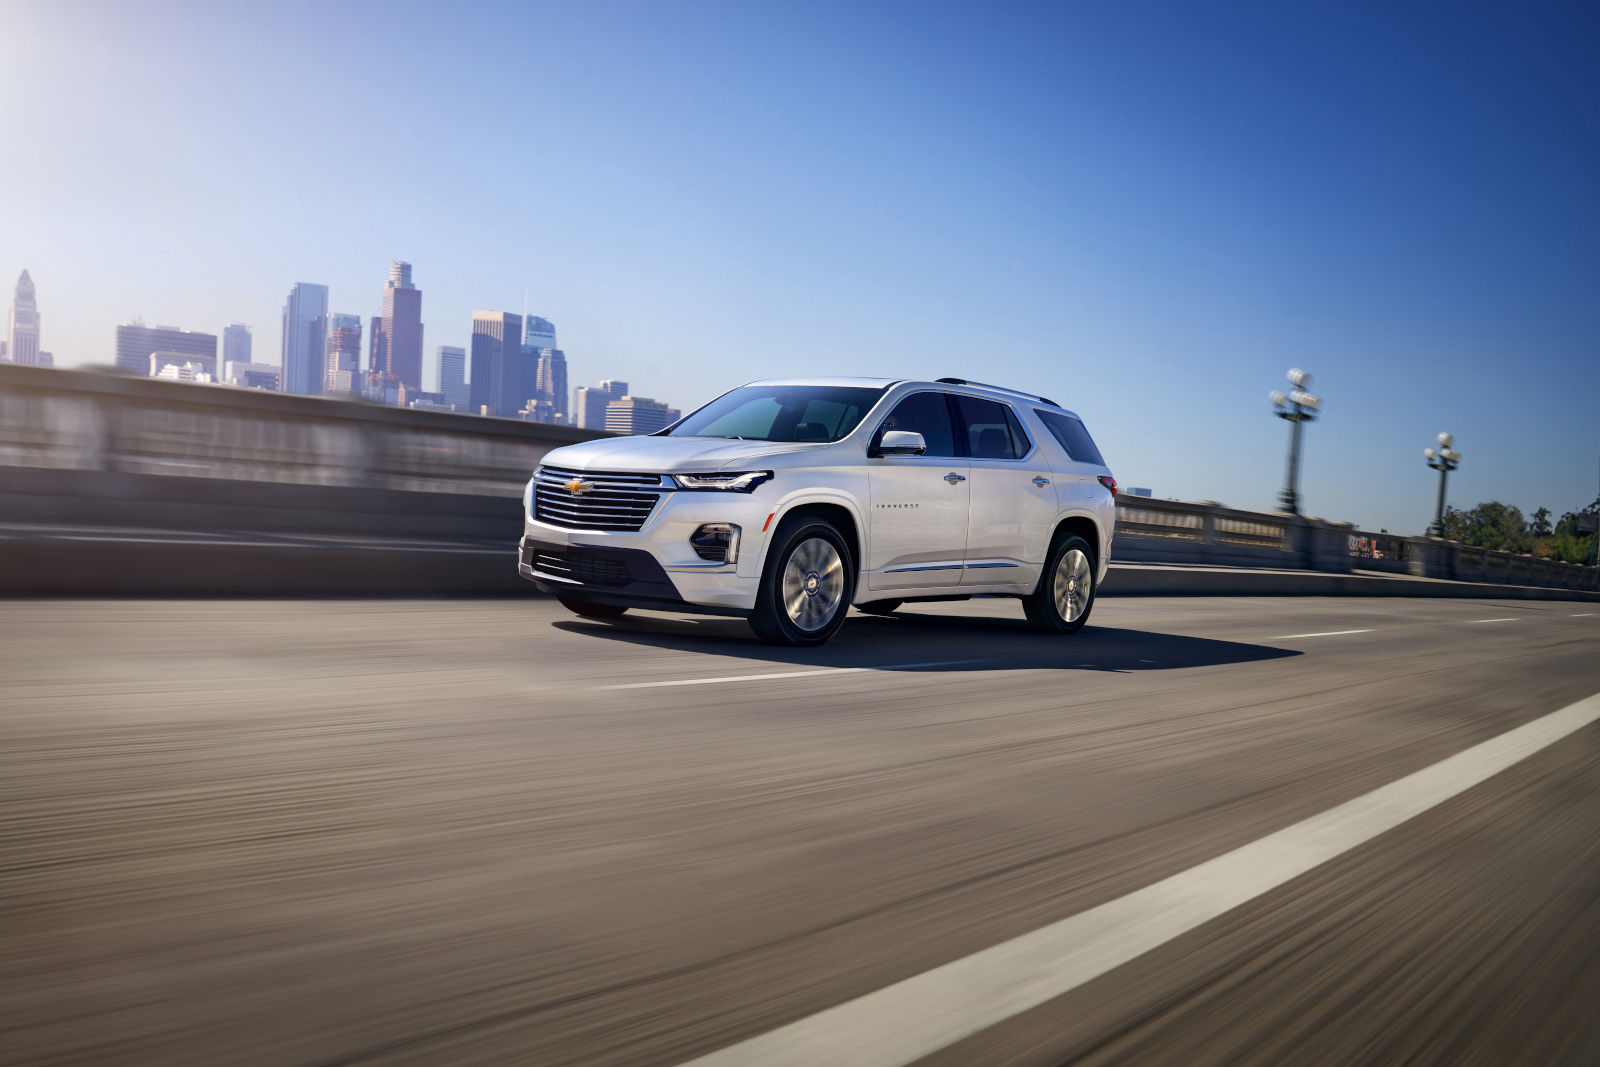 Let the 2023 Chevrolet Traverse Take You There